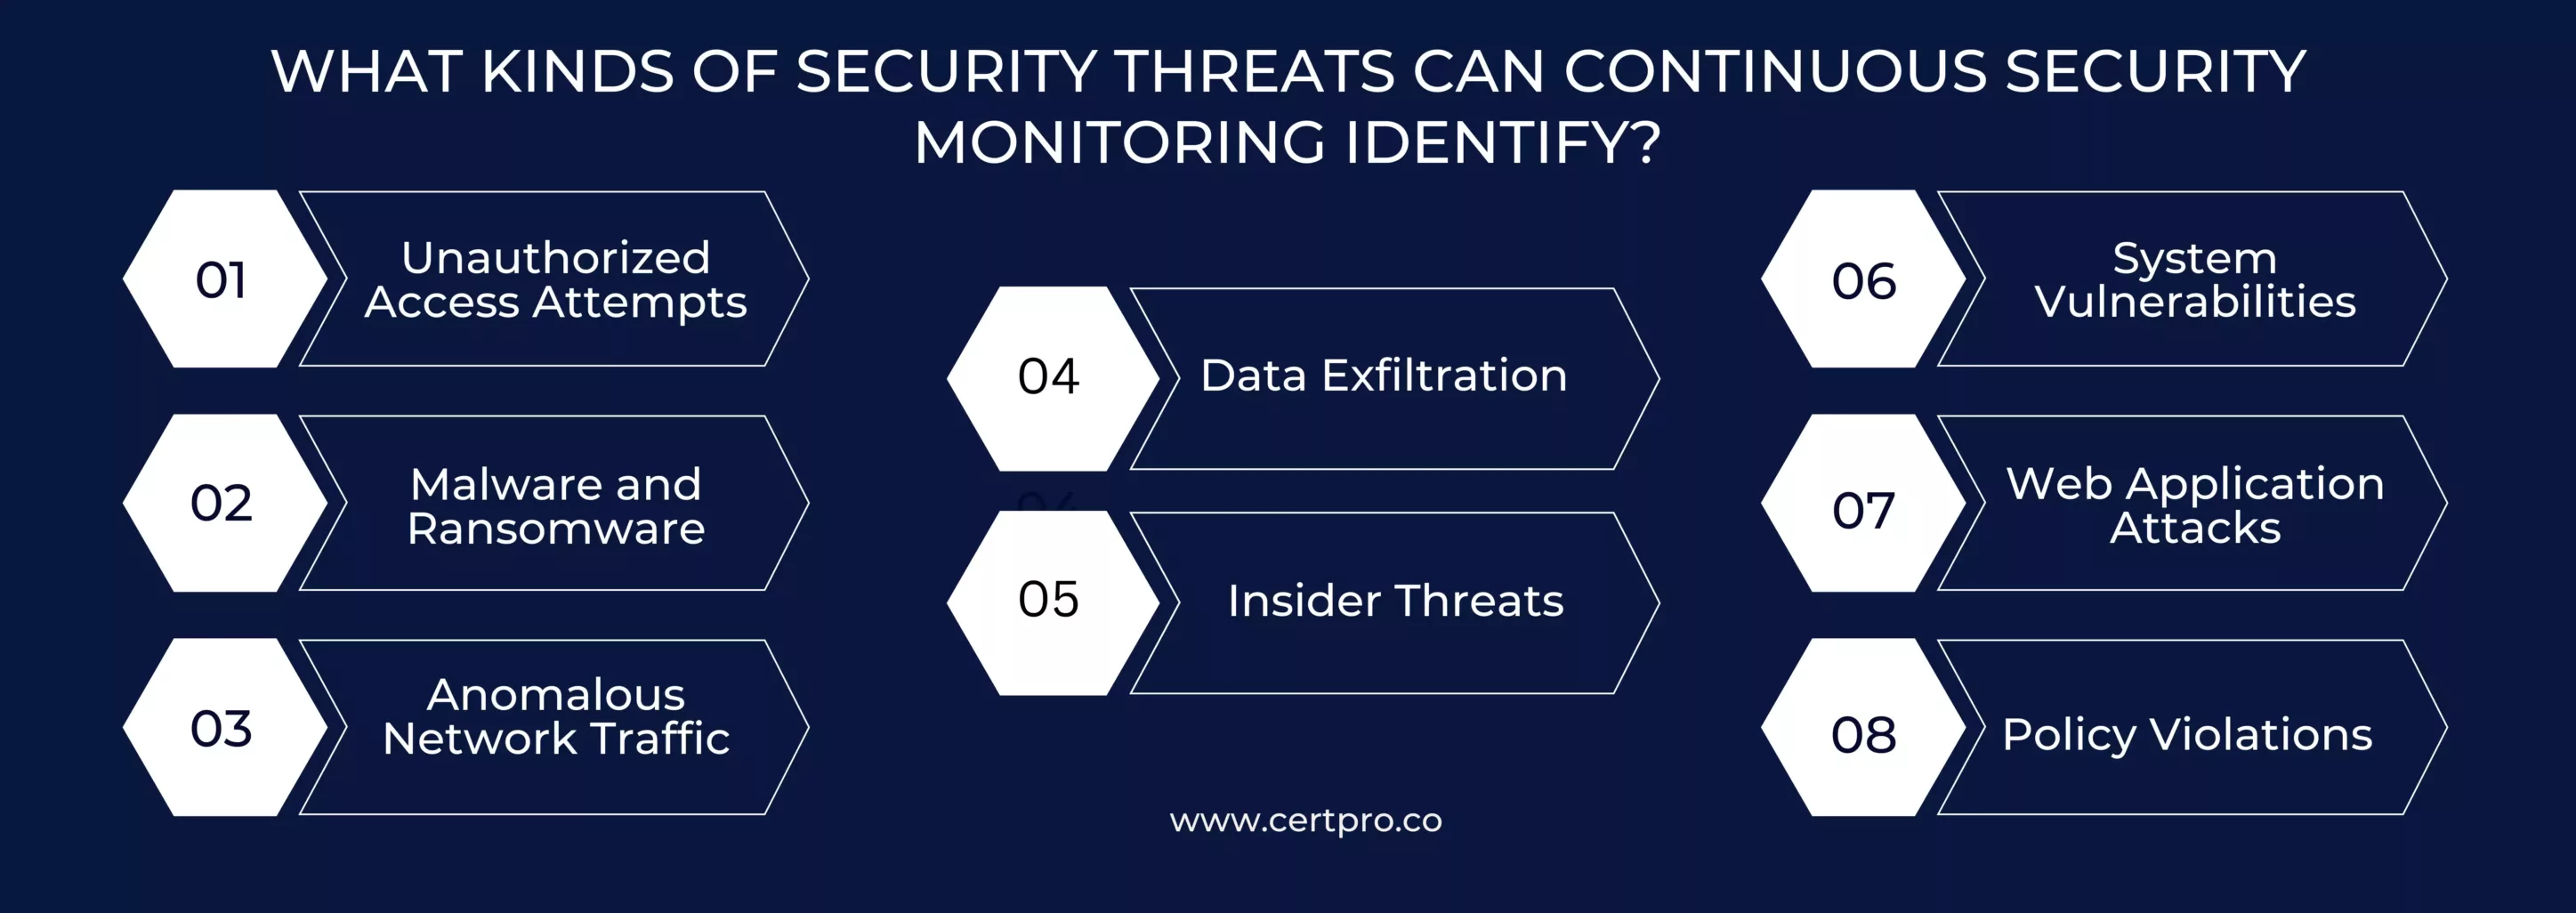 SECURITY THREATS CAN CONTINUOUS SECURITY MONITORING IDENTIFY